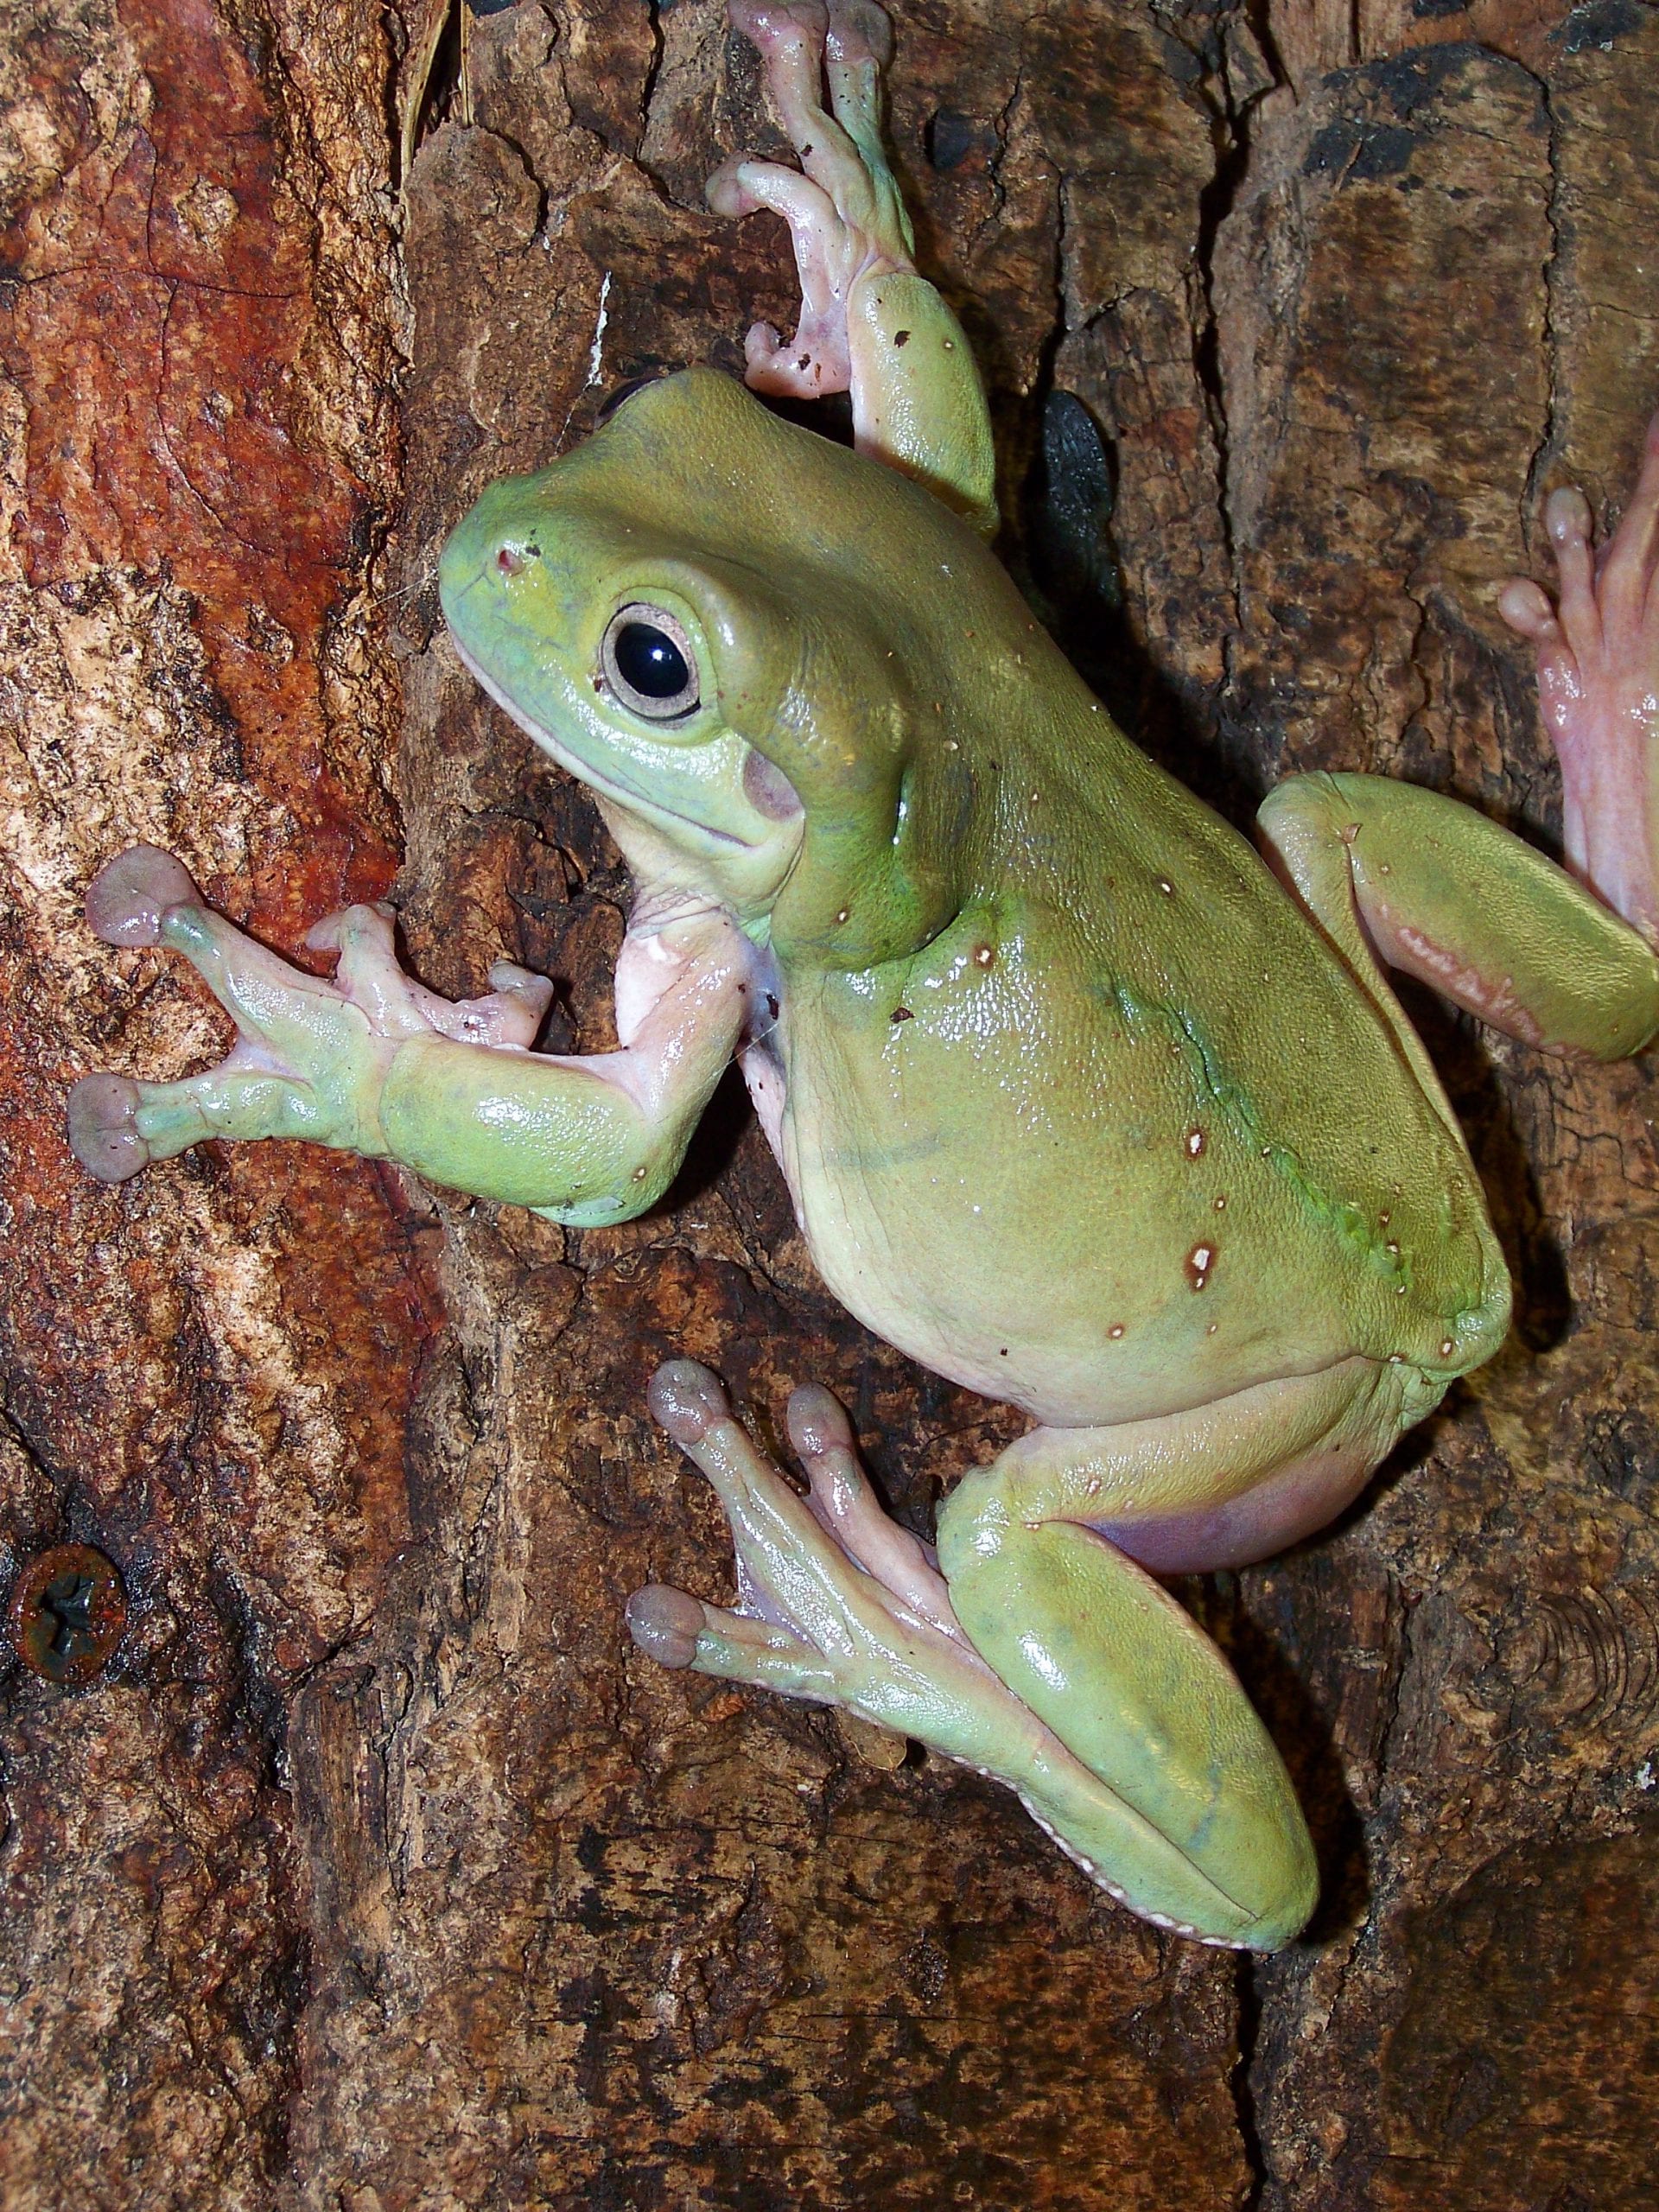 Toe Pads Adhere And Clean Themselves Australian Green Treefrog Asknature